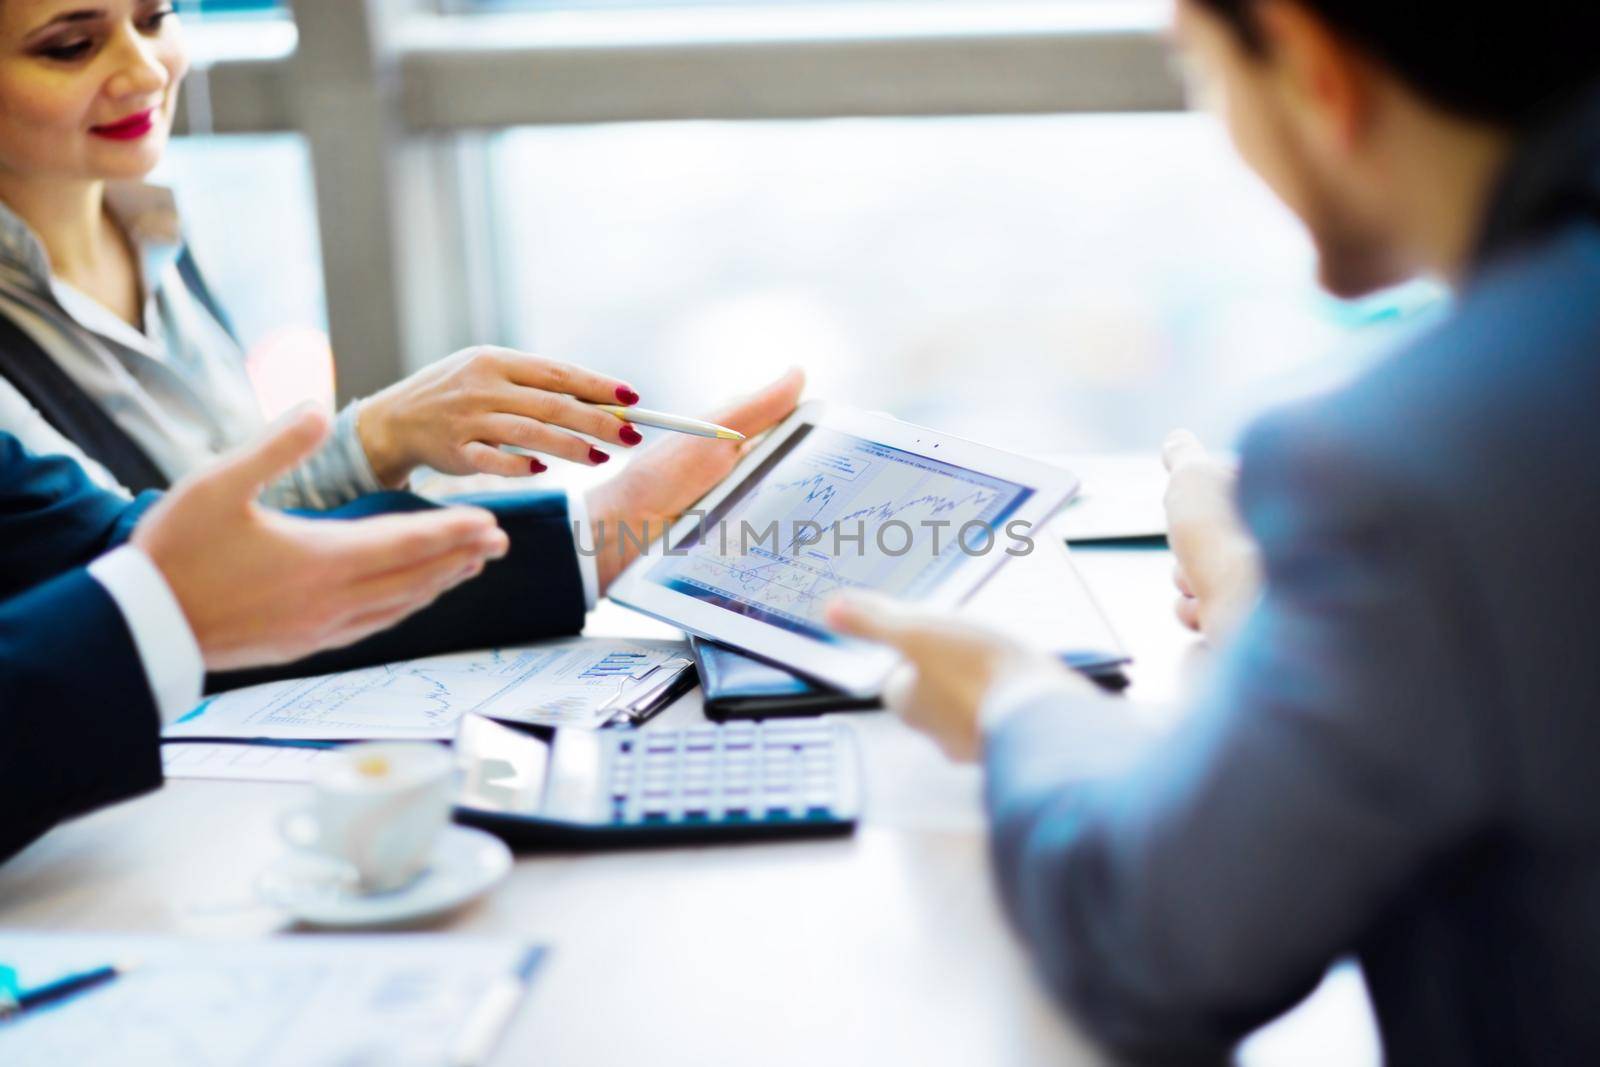 Image of human hand pointing at touchscreen in working environment at meeting